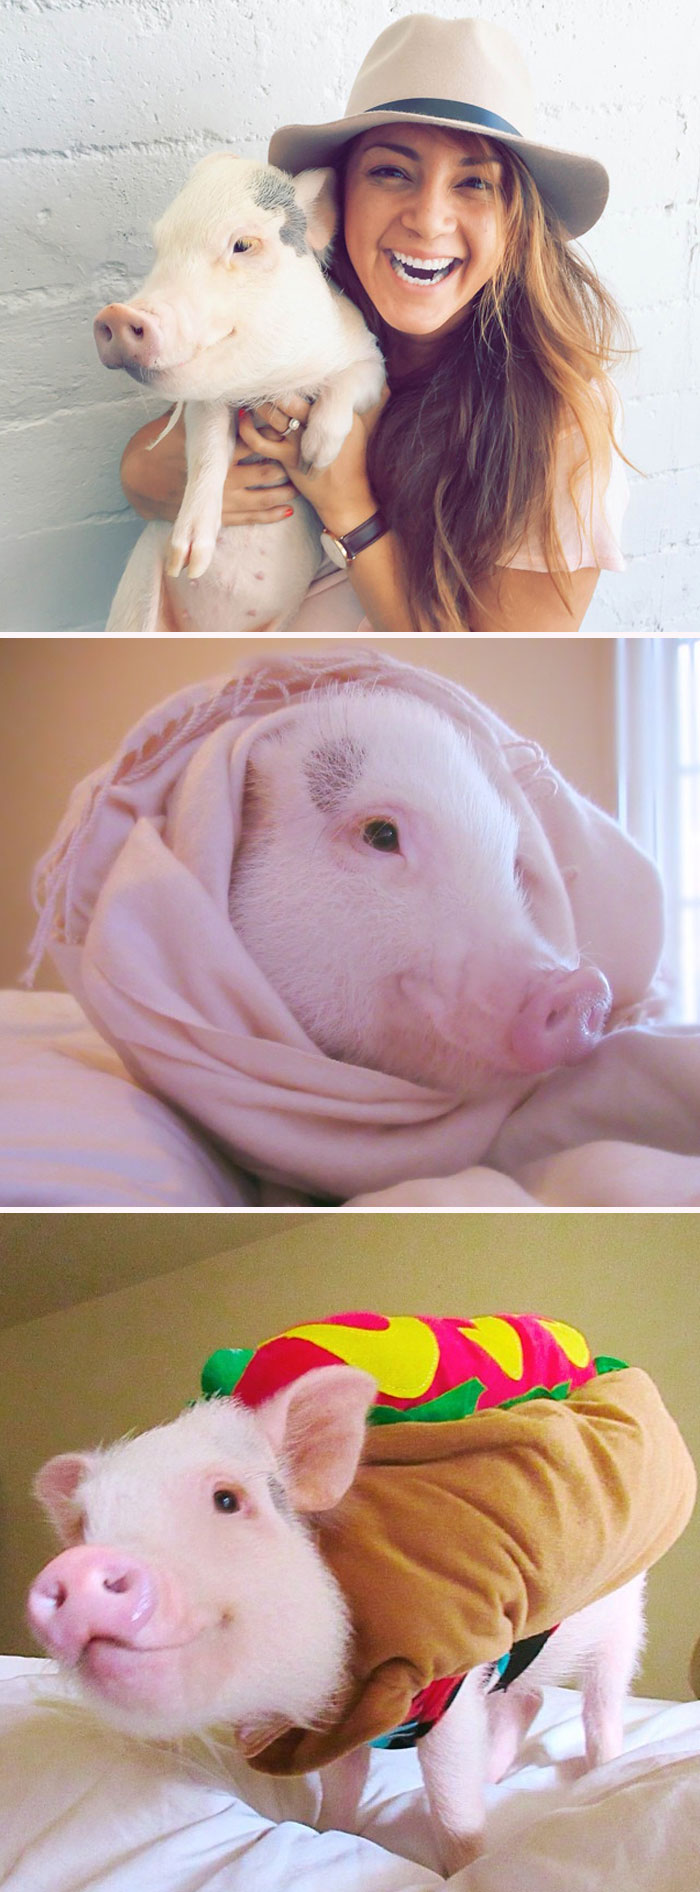 Three images: one woman with the hat happily holding a pig another pig wrapped in a pink blanket, and the last pig in a hot dog costume